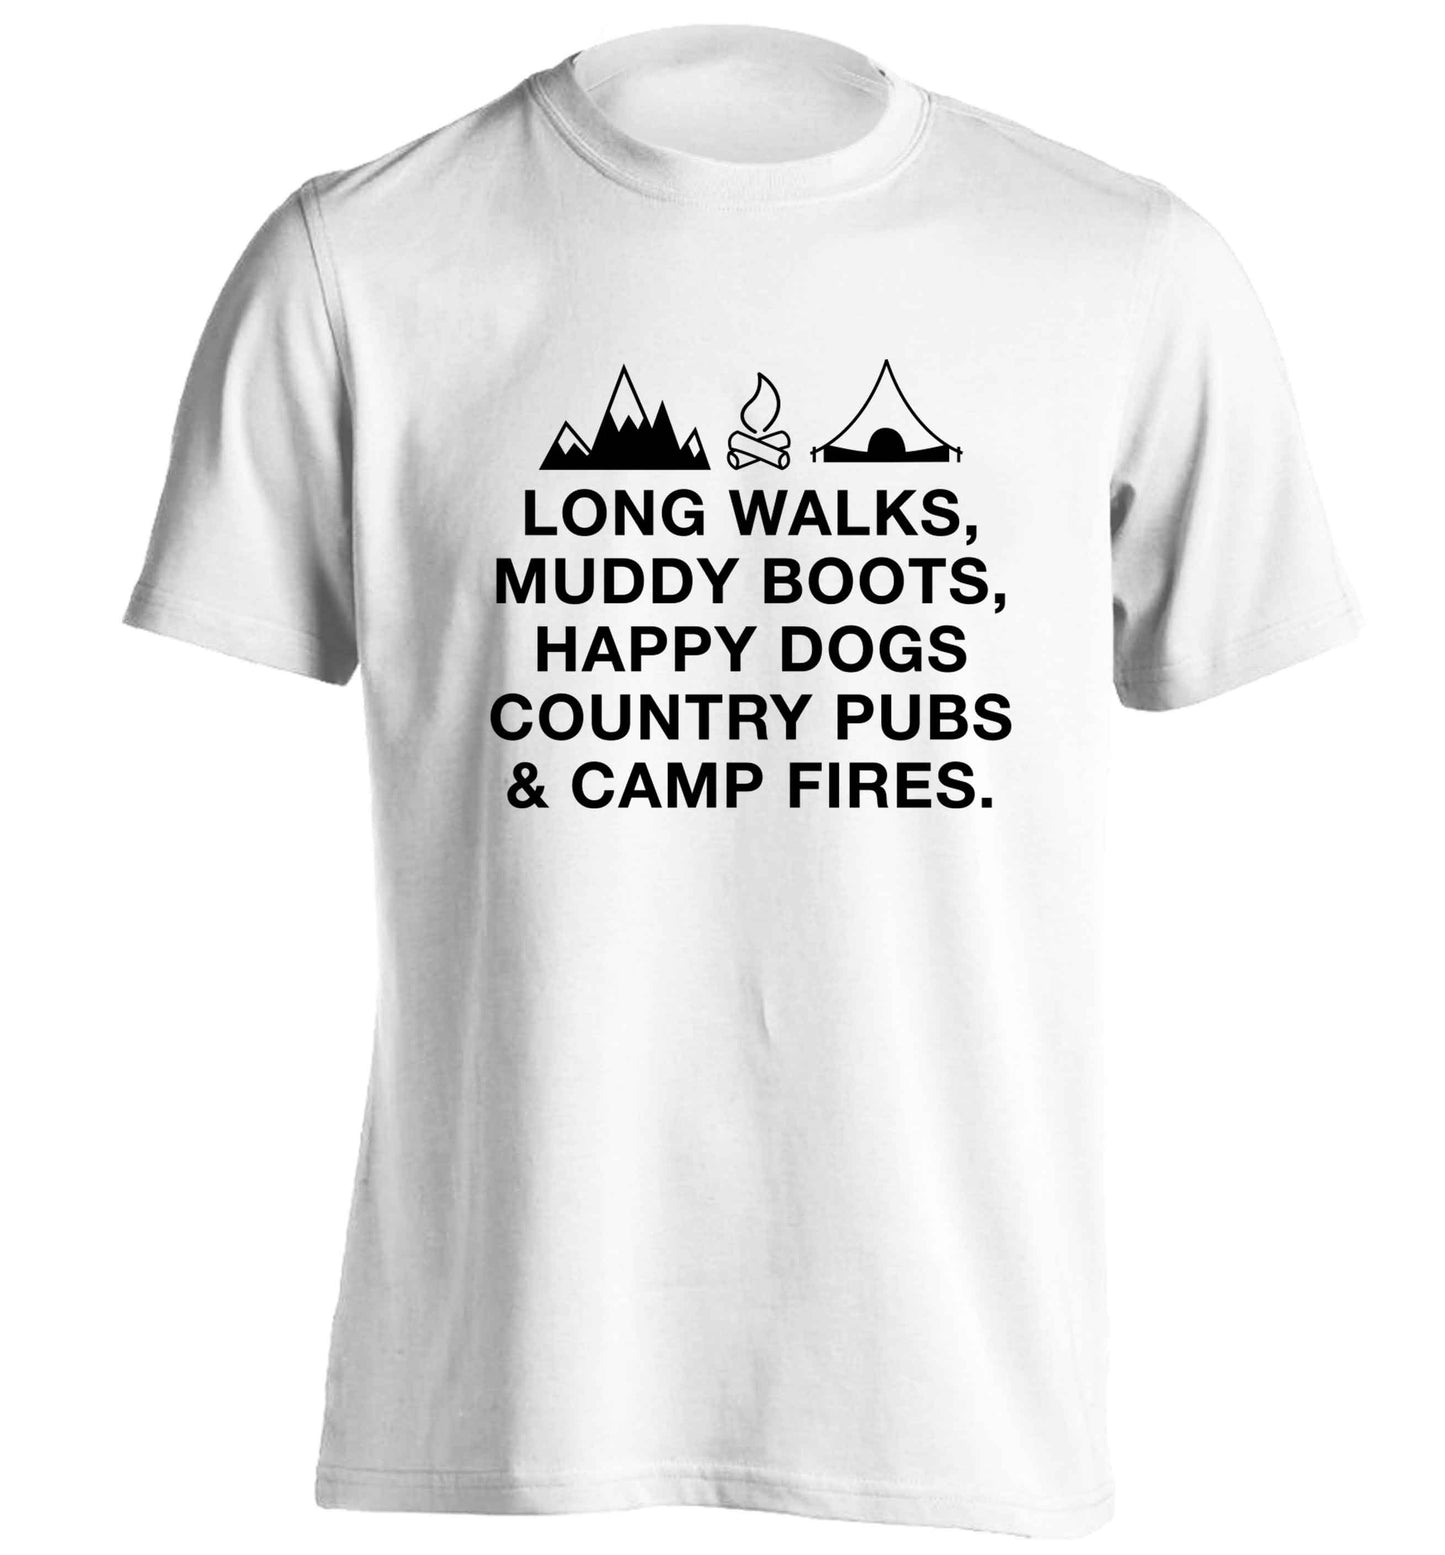 Long walks muddy boots happy dogs country pubs and camp fires adults unisex white Tshirt 2XL